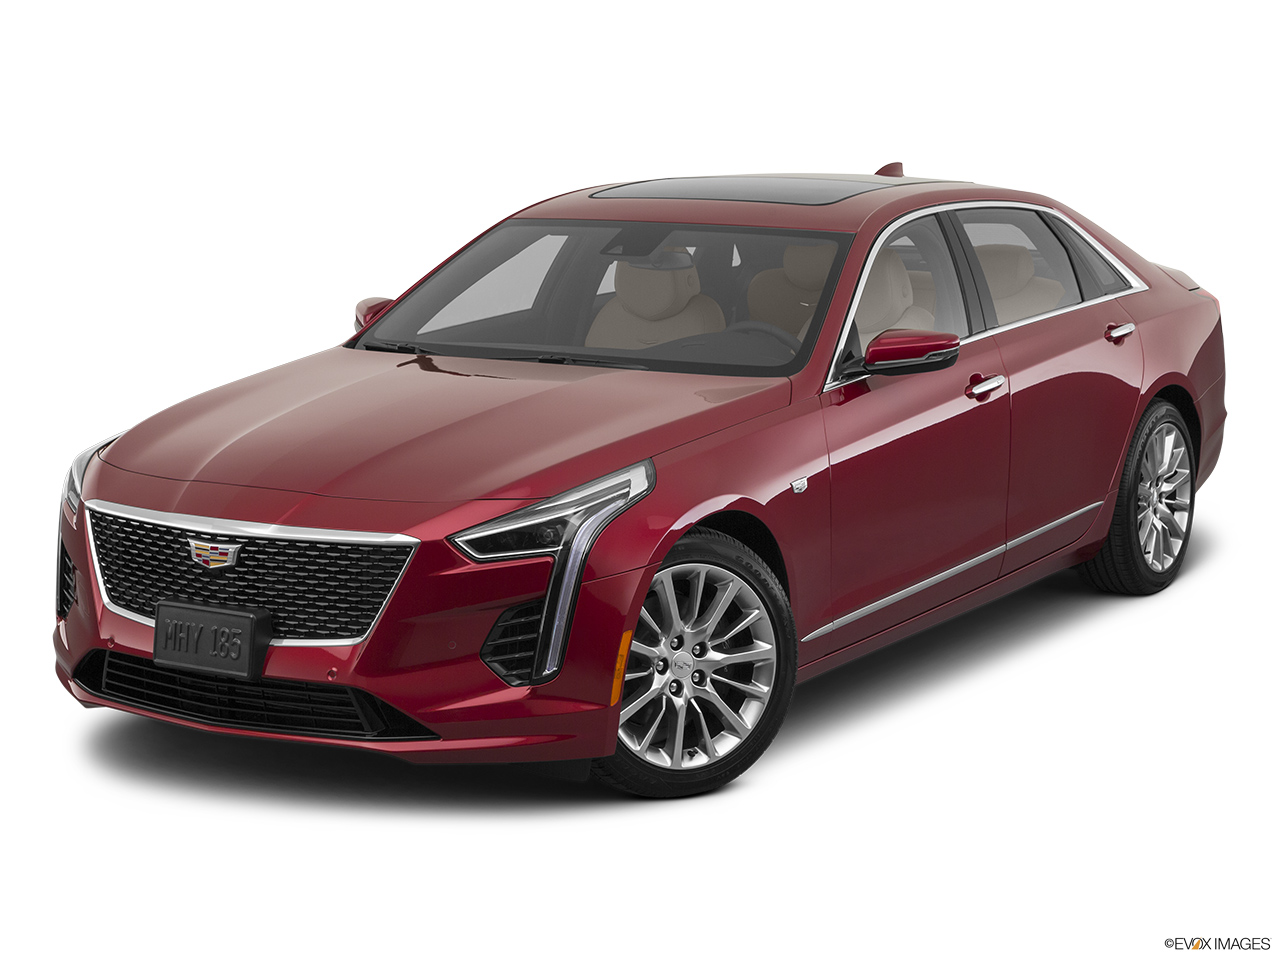 2020 Cadillac CT6 Luxury Front angle view. 